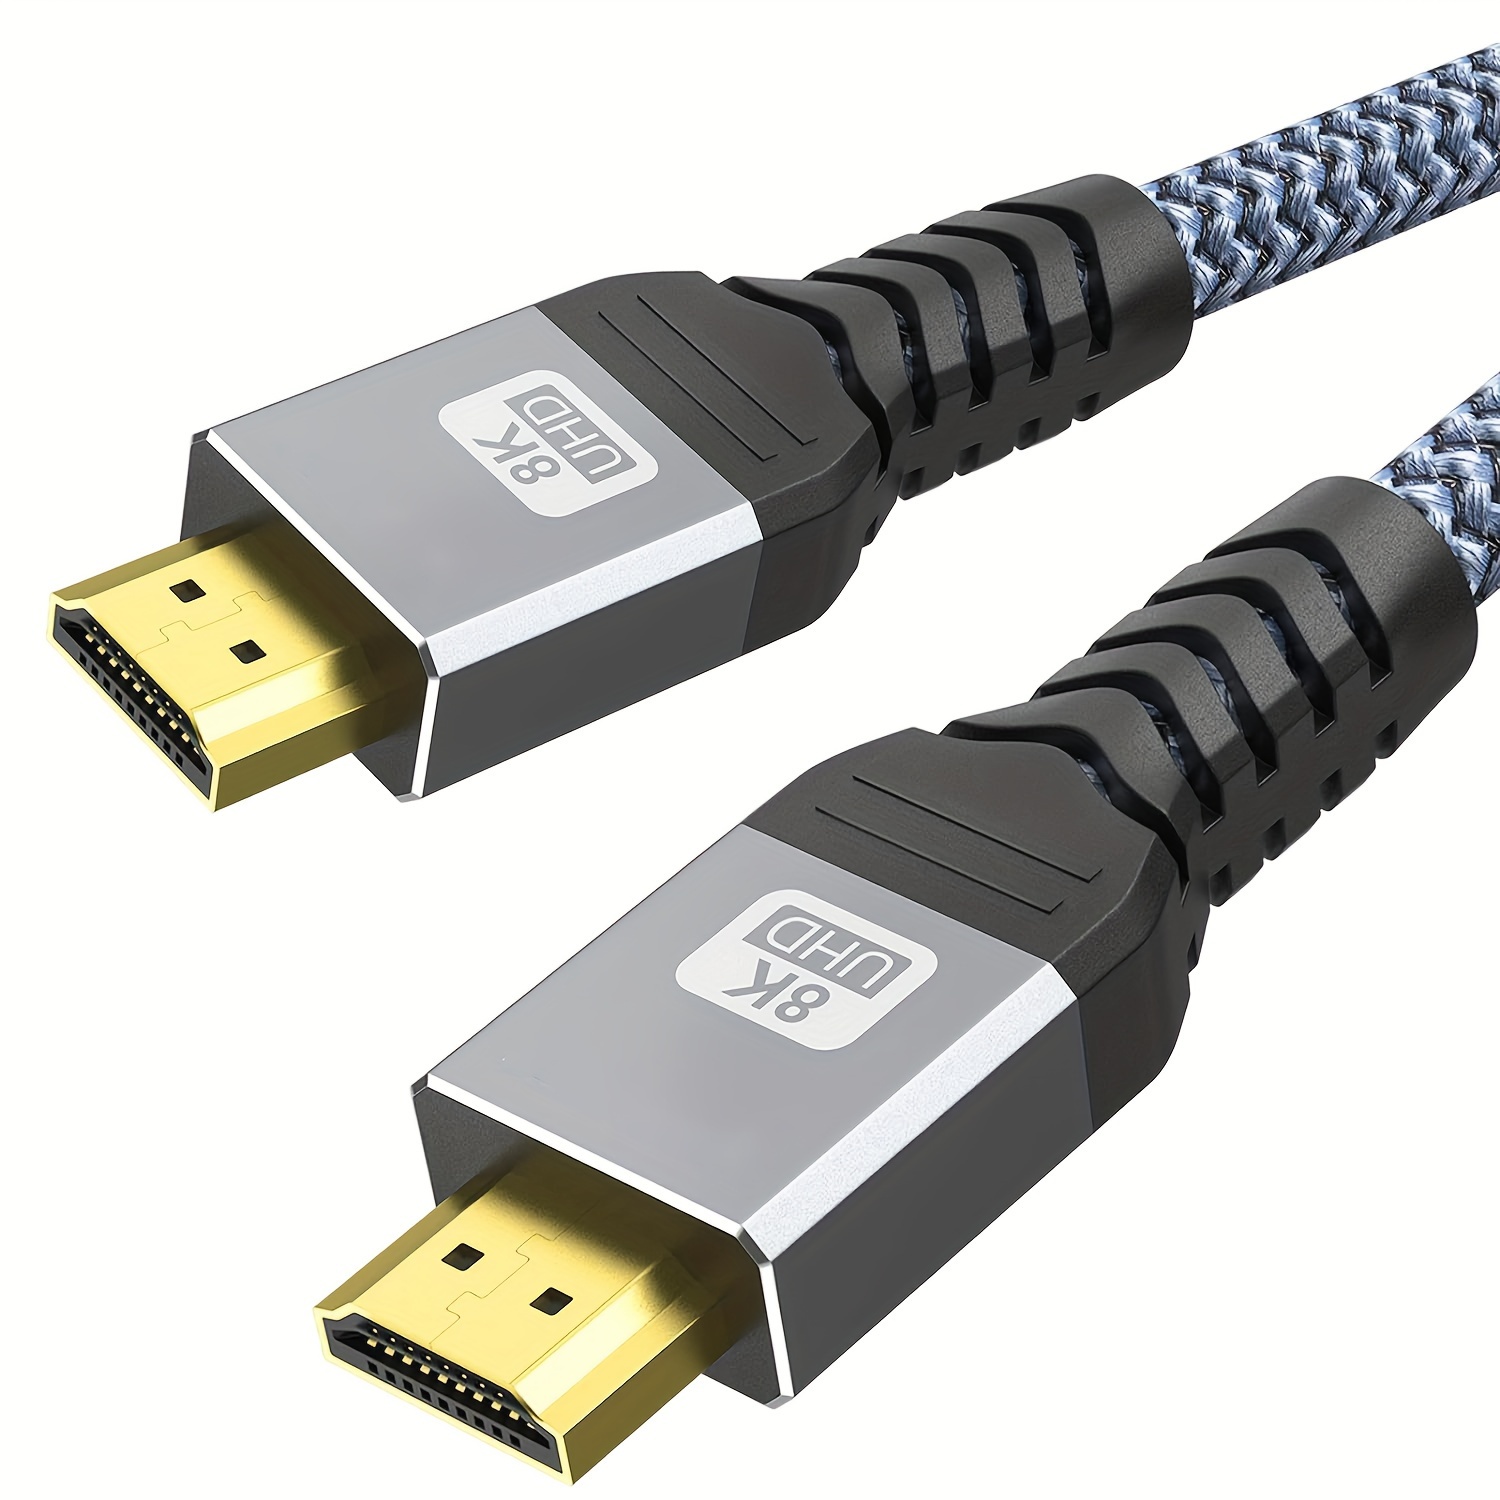 4K HDR 4:4:4 60Hz HDMI Cable with CL3 Rating (5m/16.4ft)